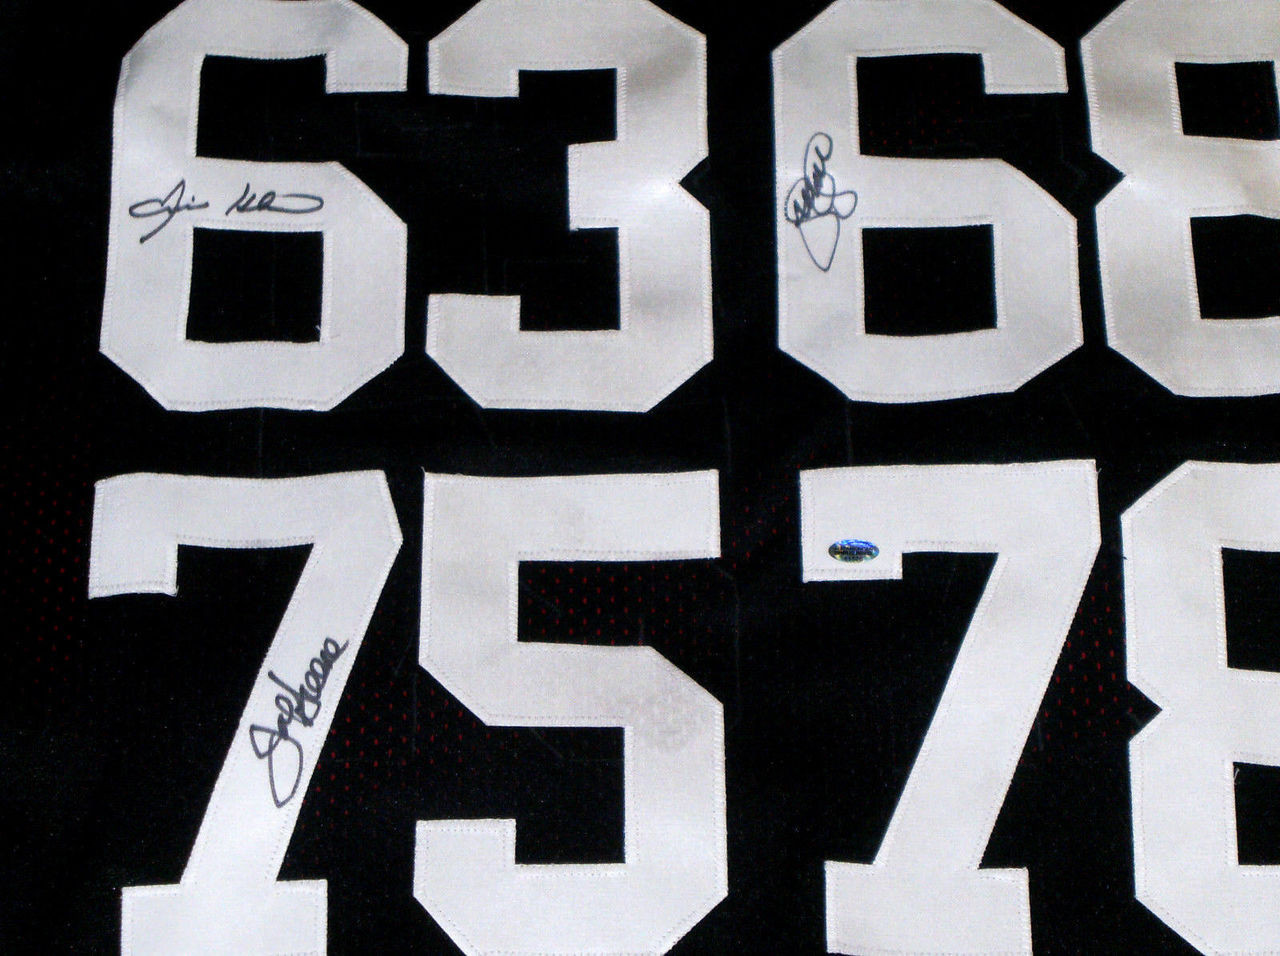 steel curtain autographed jersey